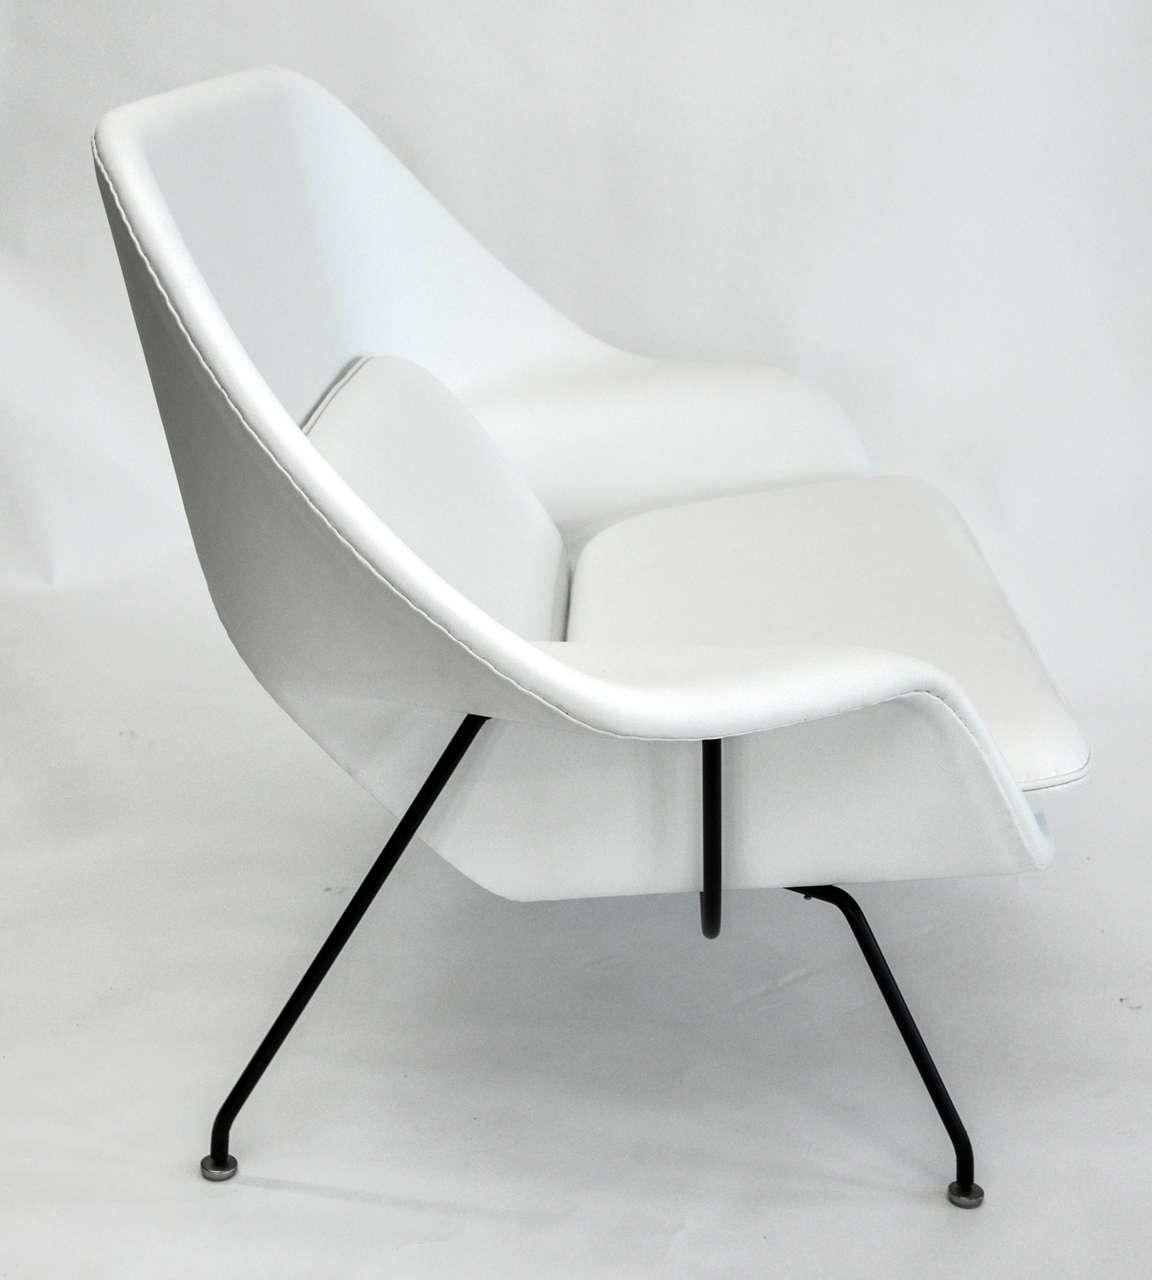 Eero Saarinen for Knoll womb settee

A womb chair fit for two

Made in the USA, circa 1960s
Manufactured by Knoll with original tag

Measures: 35 H
62 W
34 D in

Seat height 16 in
Arm height 20.5 in

Restored in supple white leather